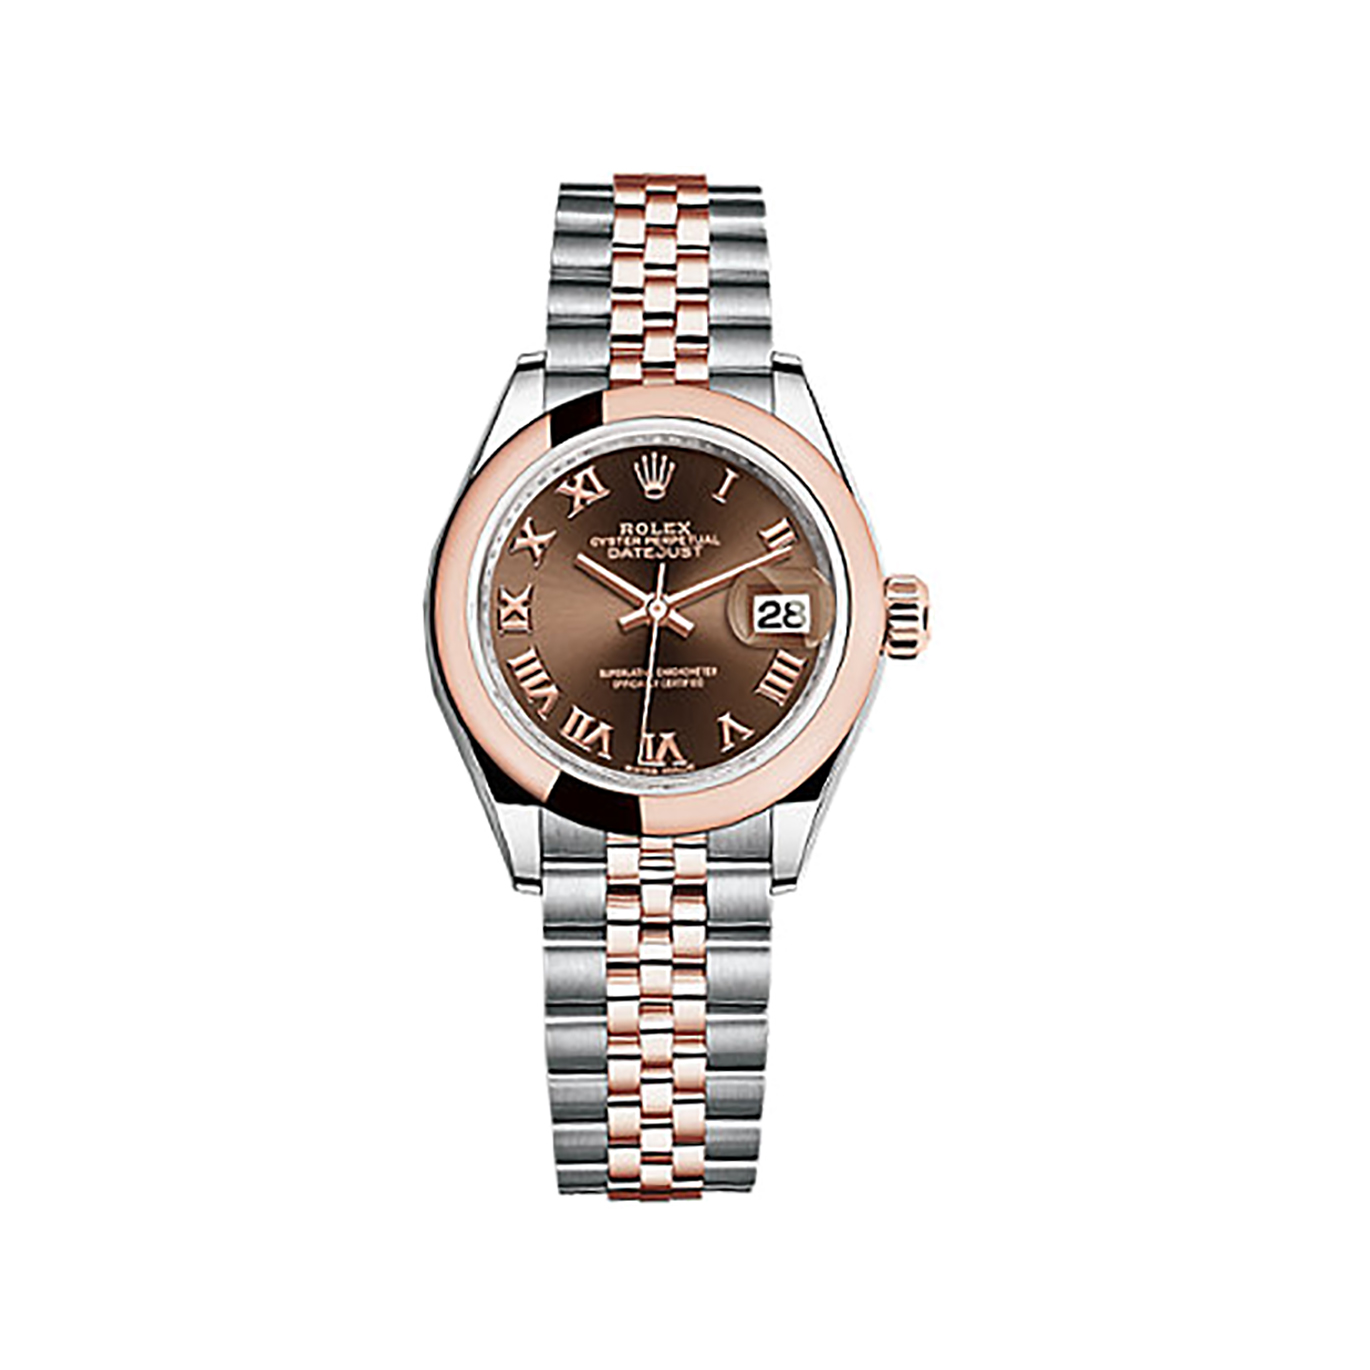 Lady-Datejust 28 279161 Rose Gold & Stainless Steel Watch (Chocolate)